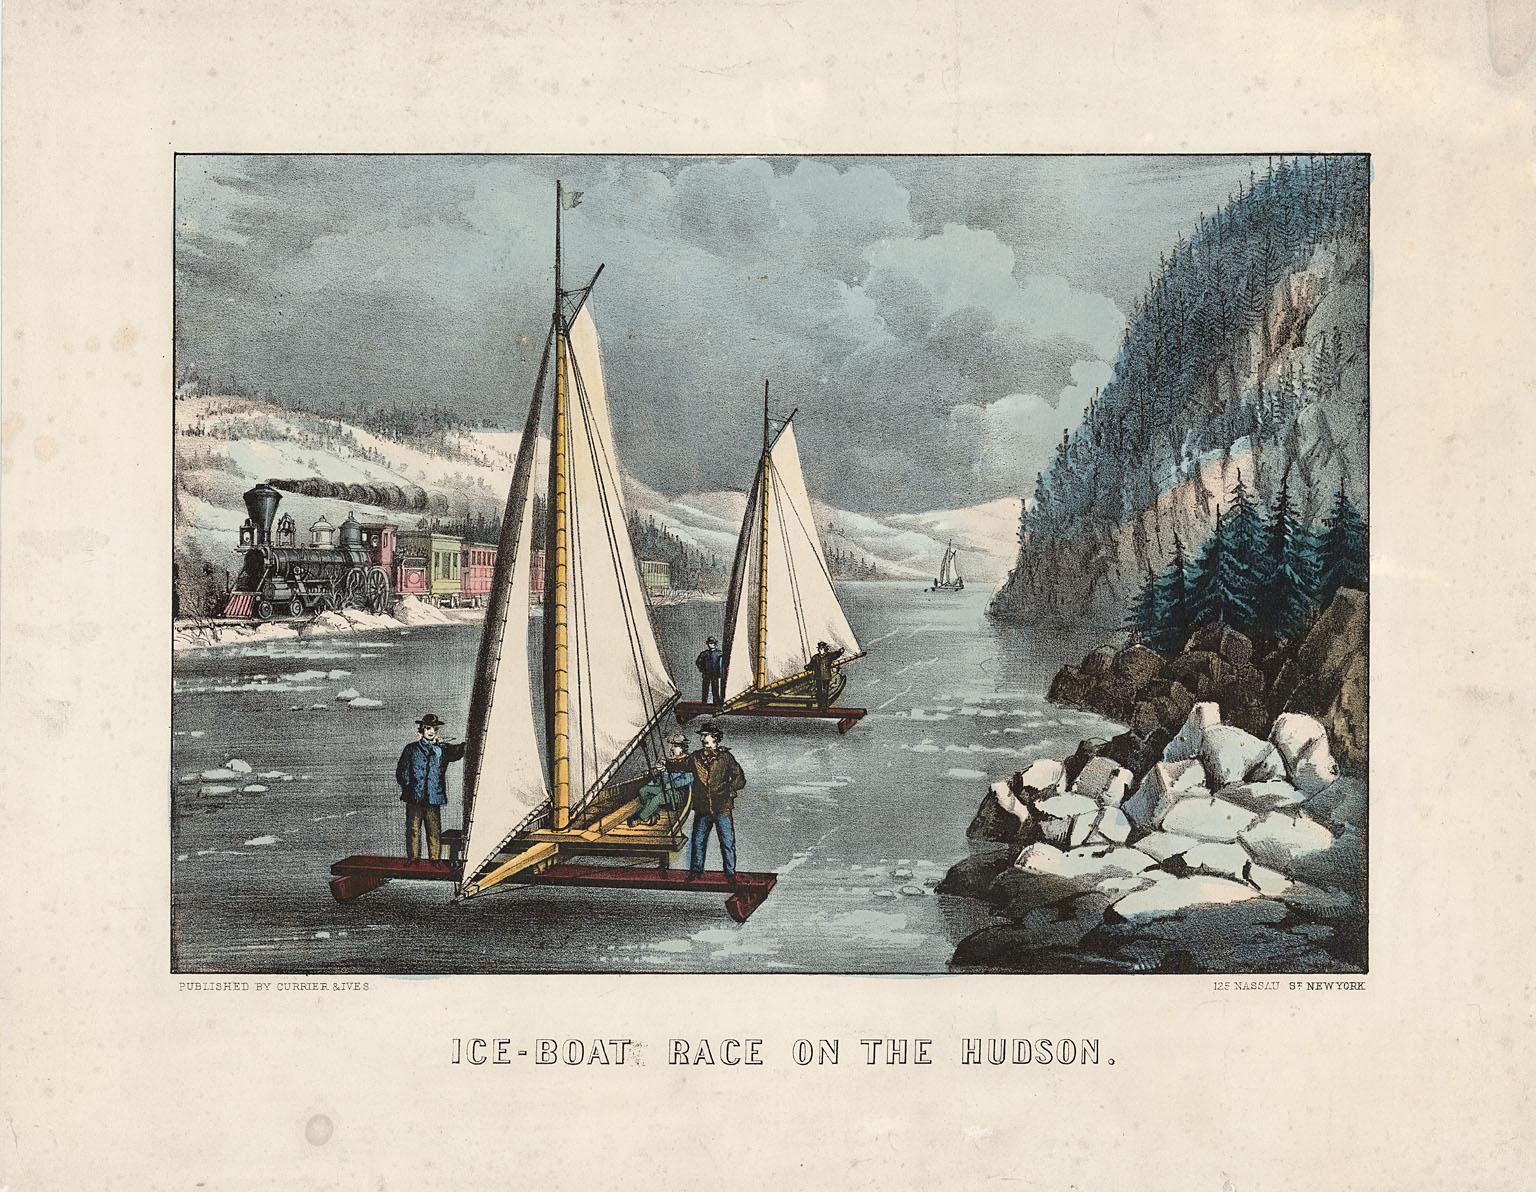 Ice-Boat Race on the Hudson. - Print by Currier & Ives